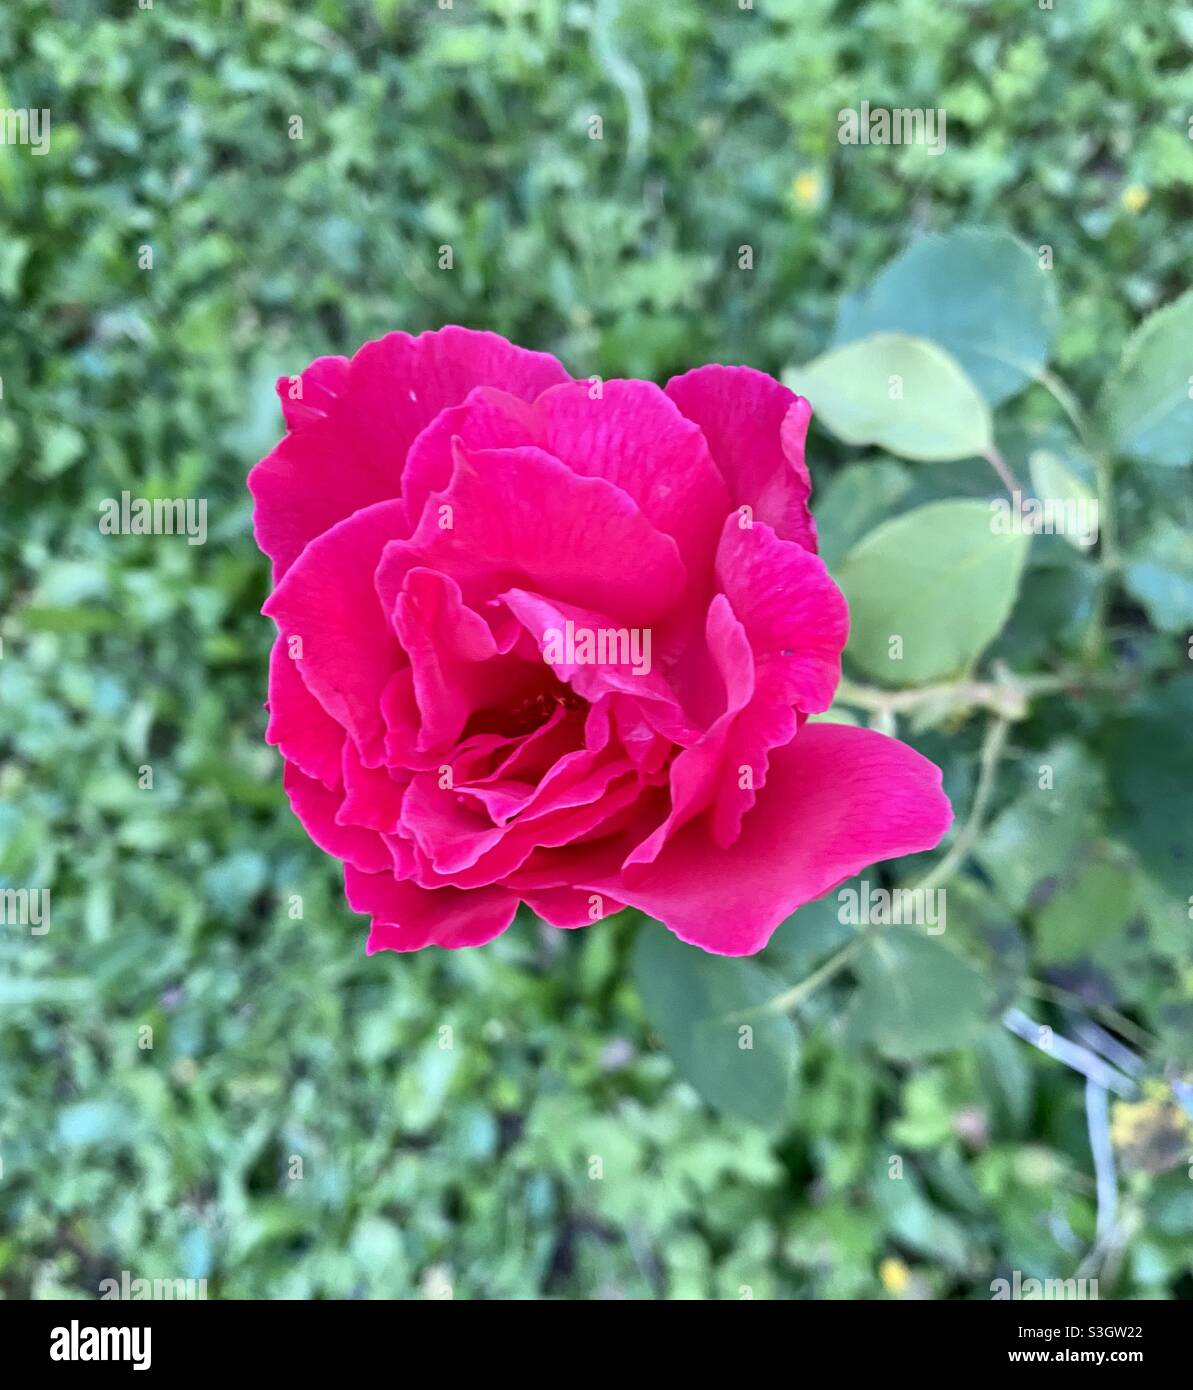 Red rose in bloom nature photography Stock Photo